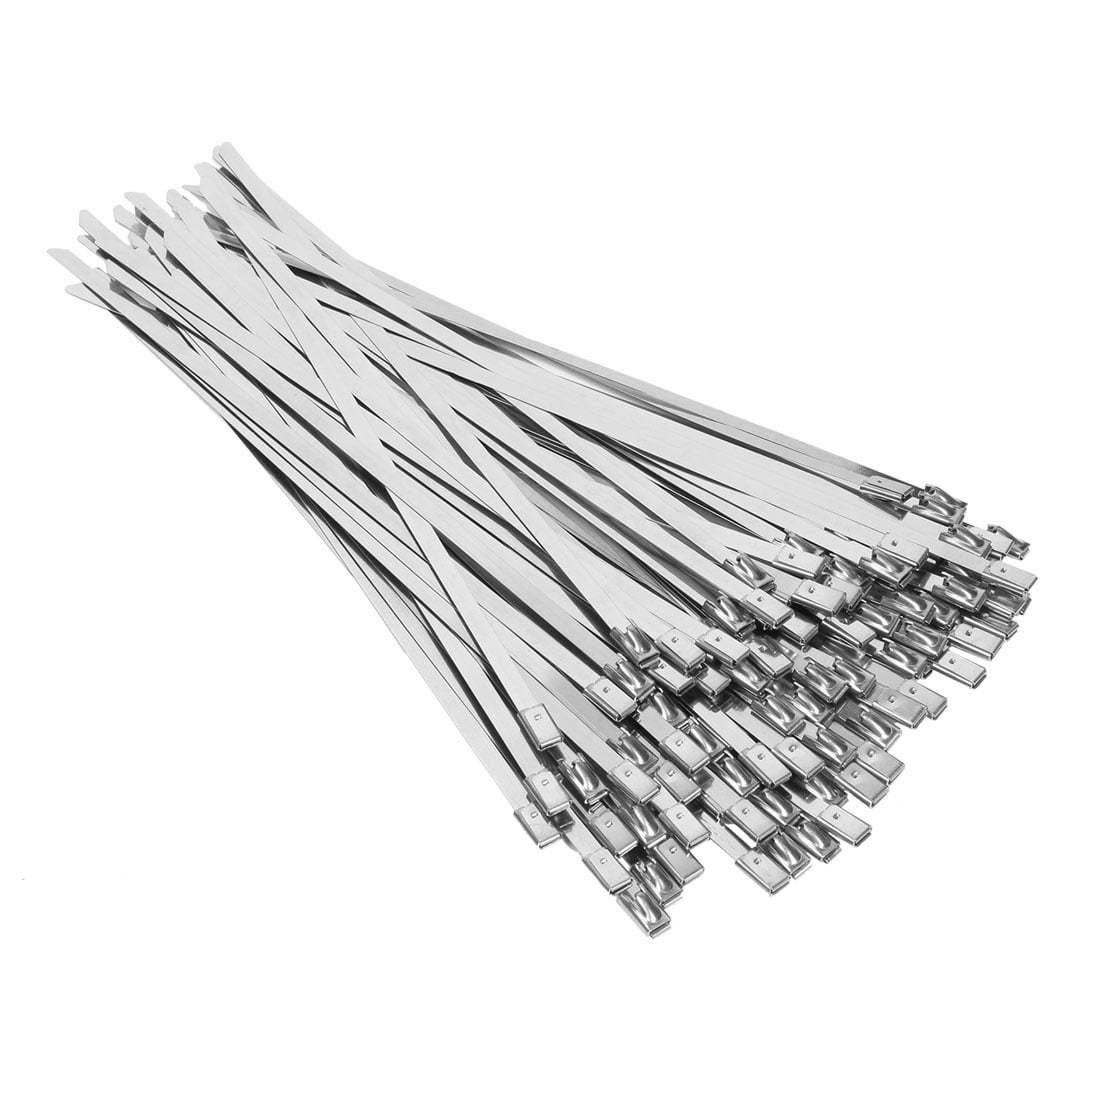 The Elixir 200pcs 11.8 Inches Stainless Steel Exhaust Wrap Coated Self Locking Cable Zip Ties